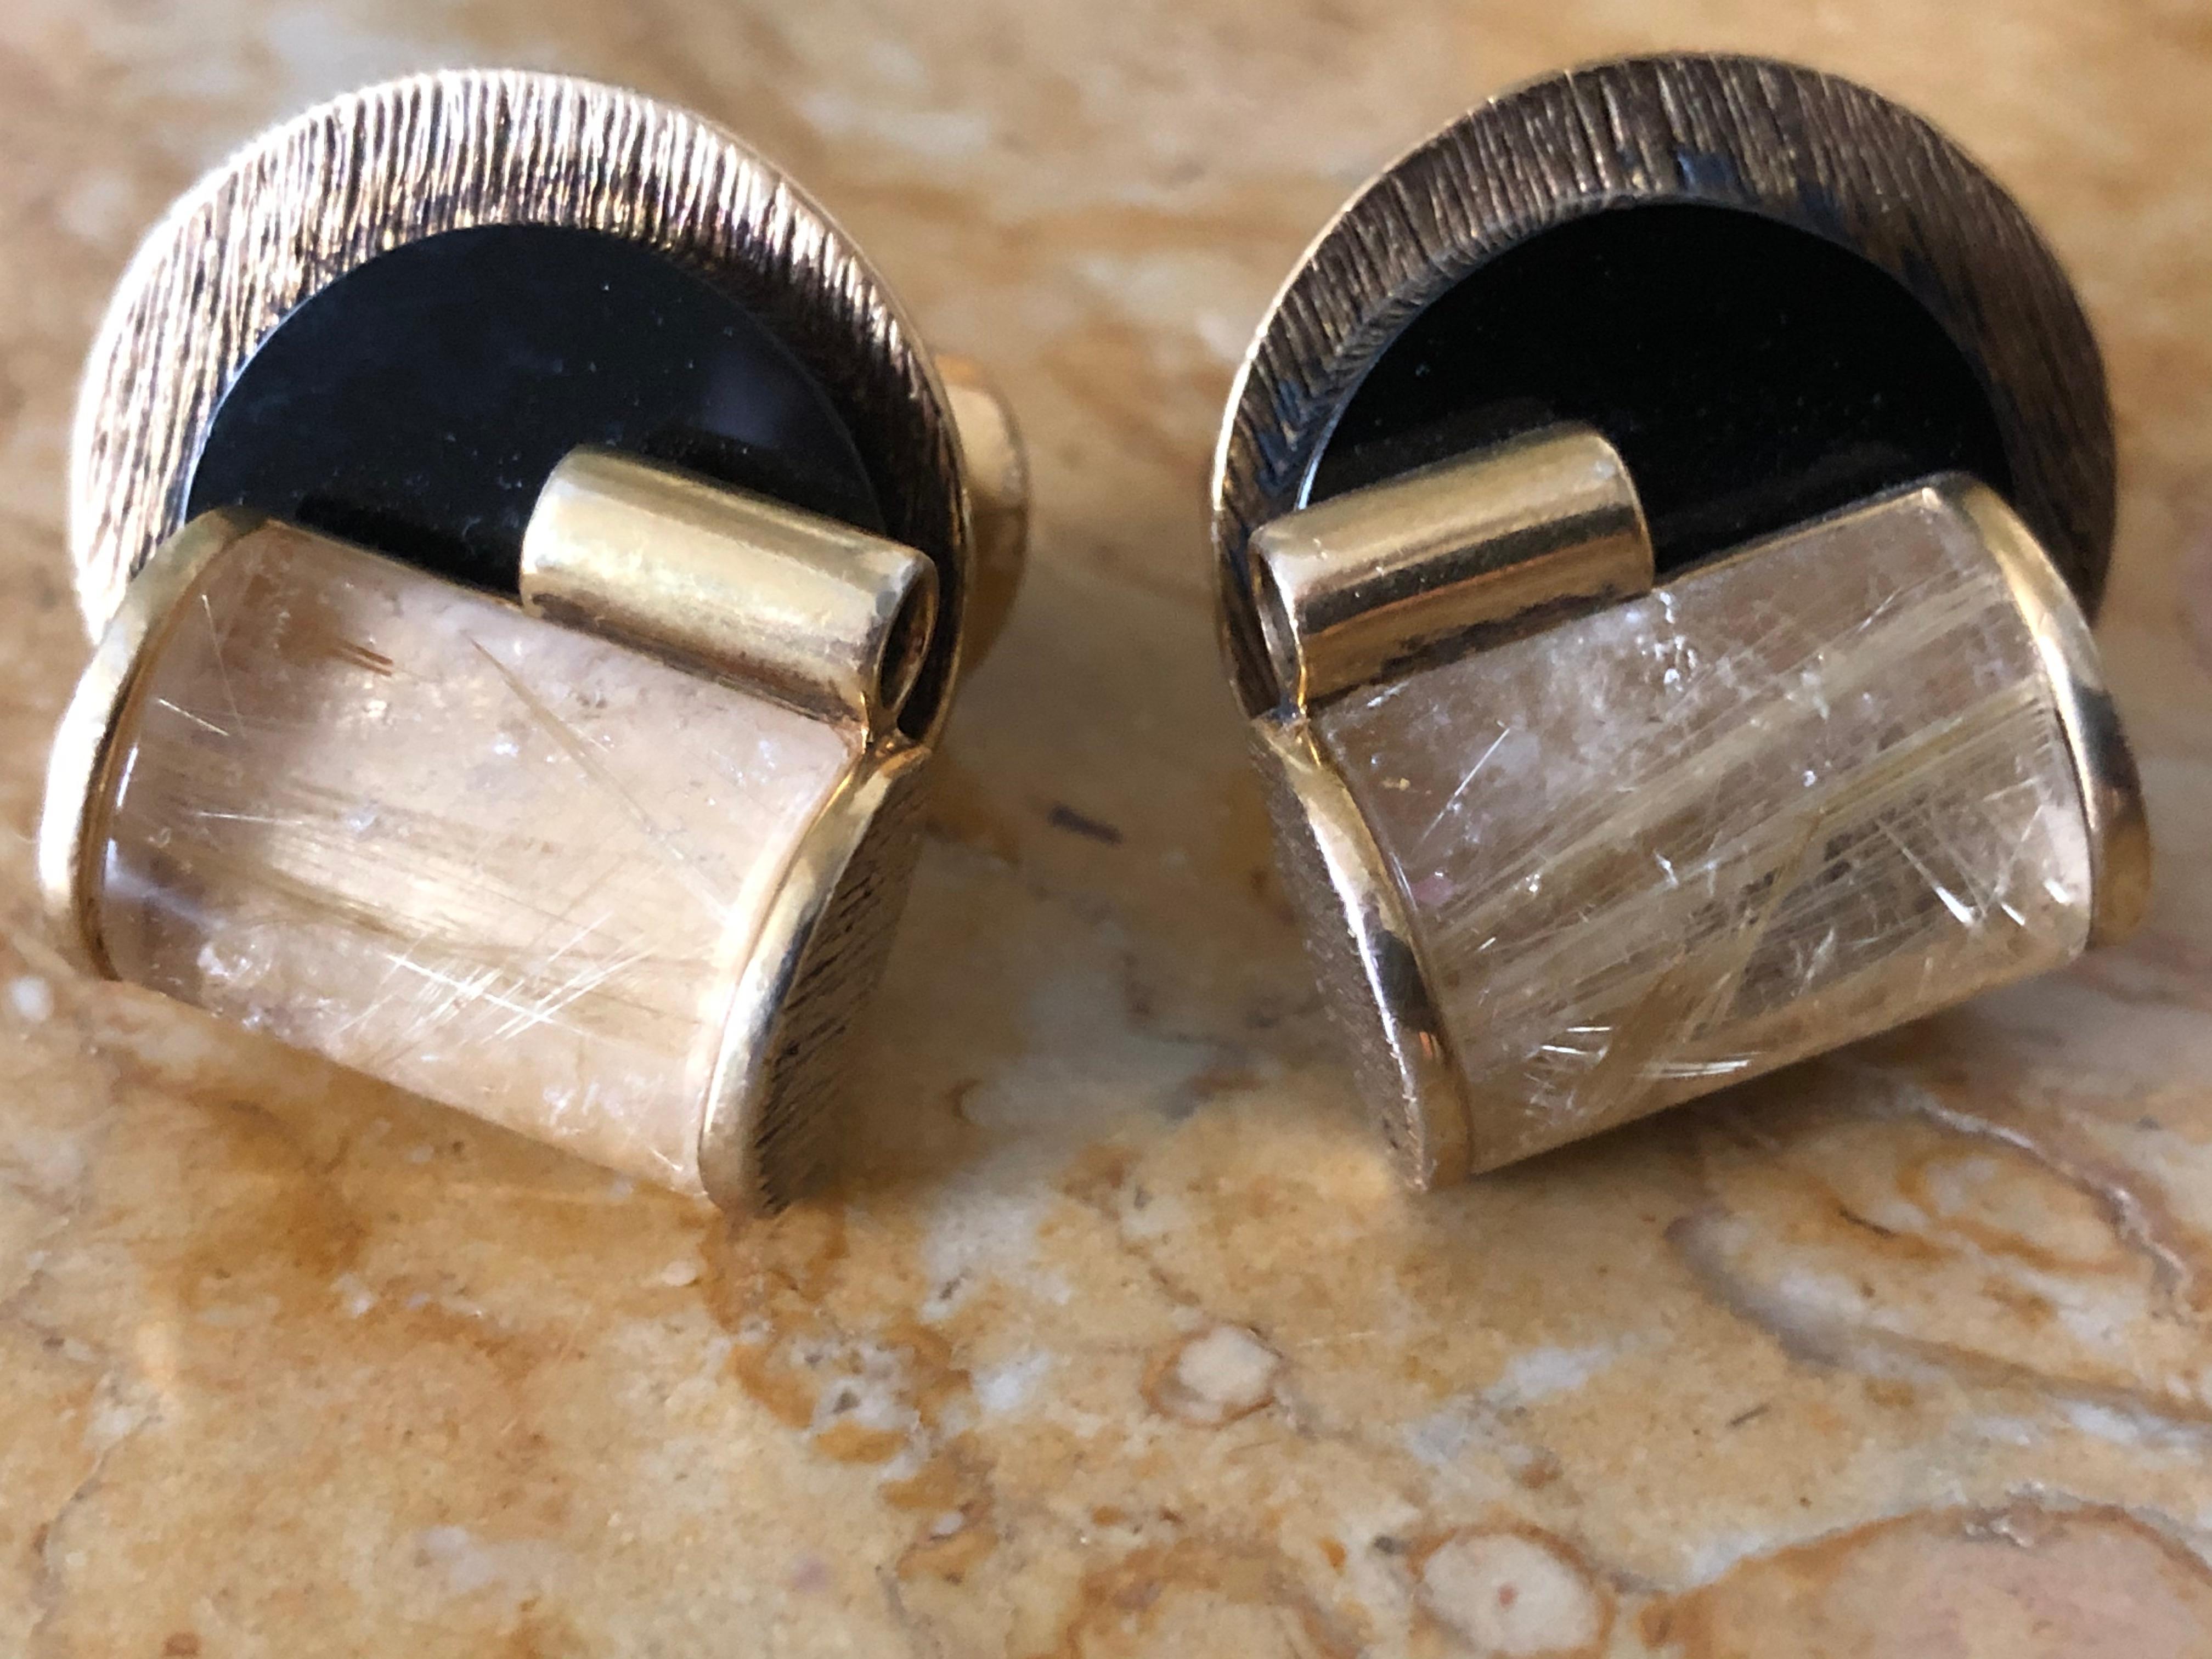 Marc Jacobs Brutalist Vintage Vermeil Rutilated Quartz Cufflinks.
Gold plated sterling silver with large rutilated quartz stones.
The front of the cufflink is 1